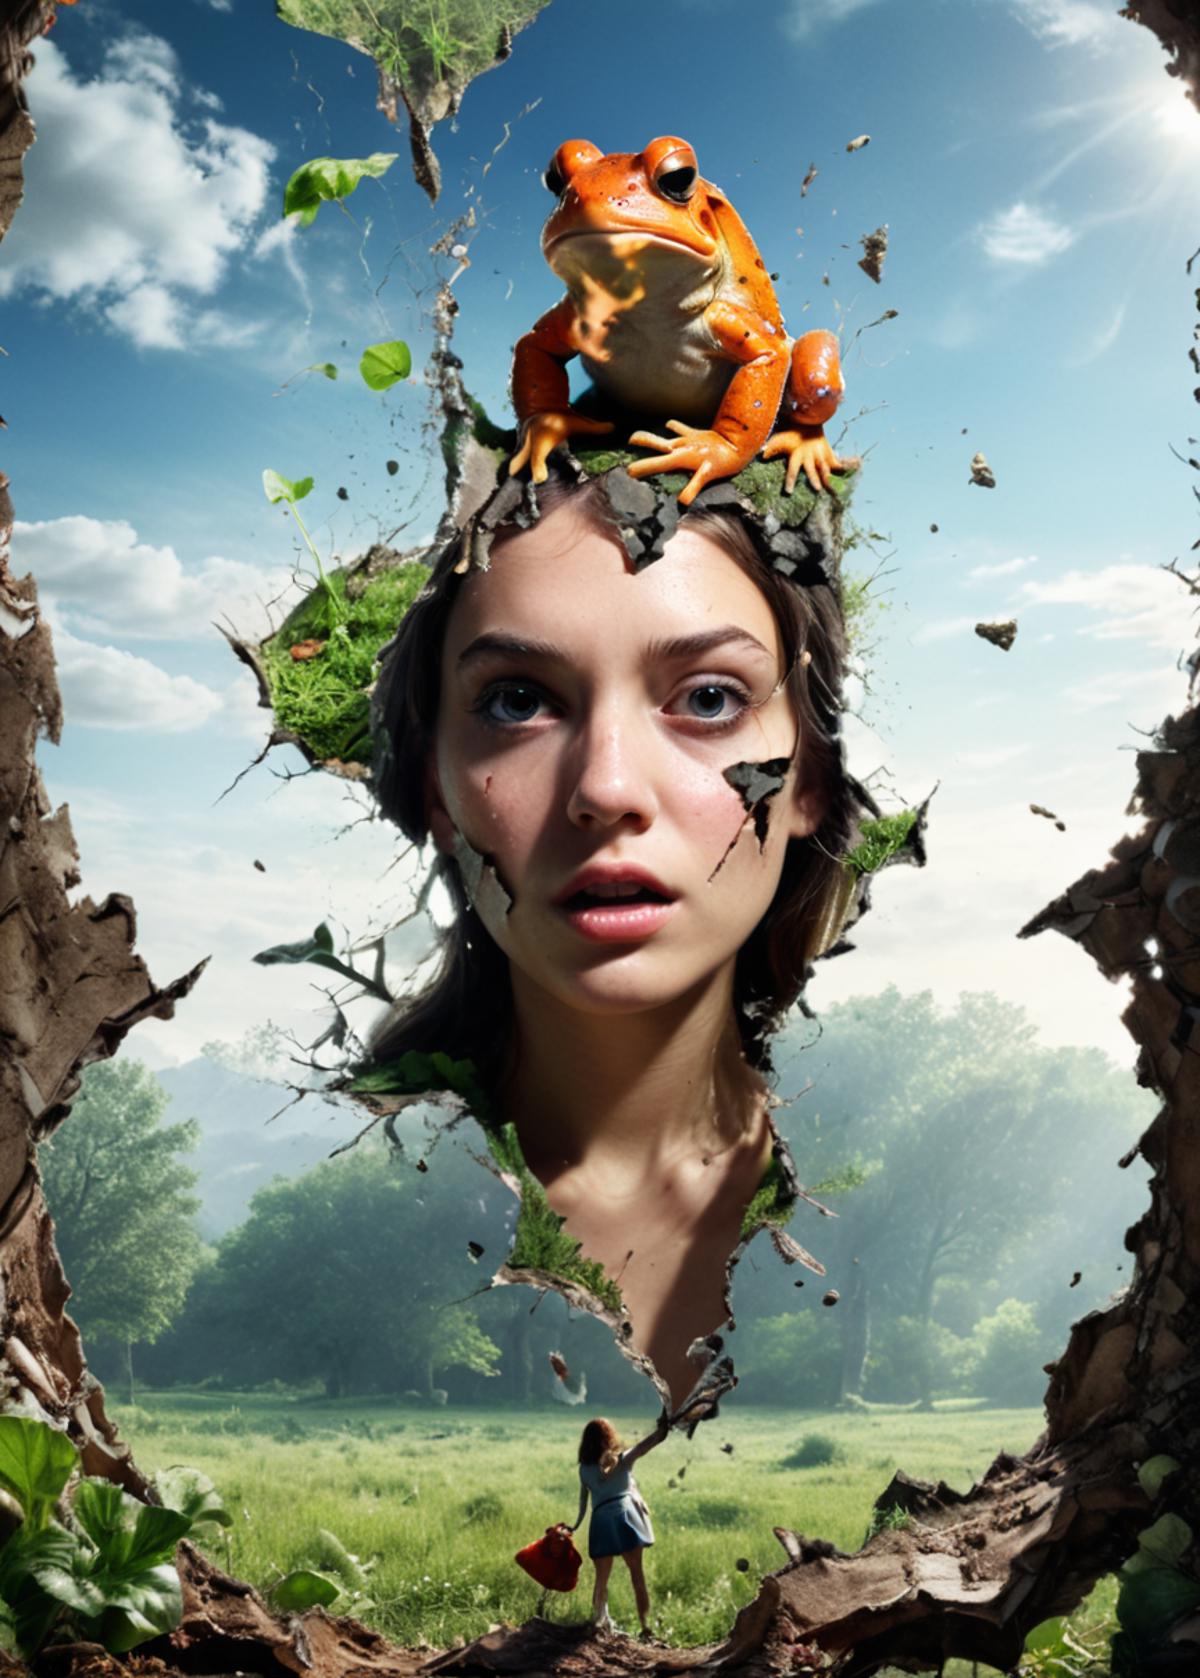 A young woman with a frog on her head and a forest in the background.